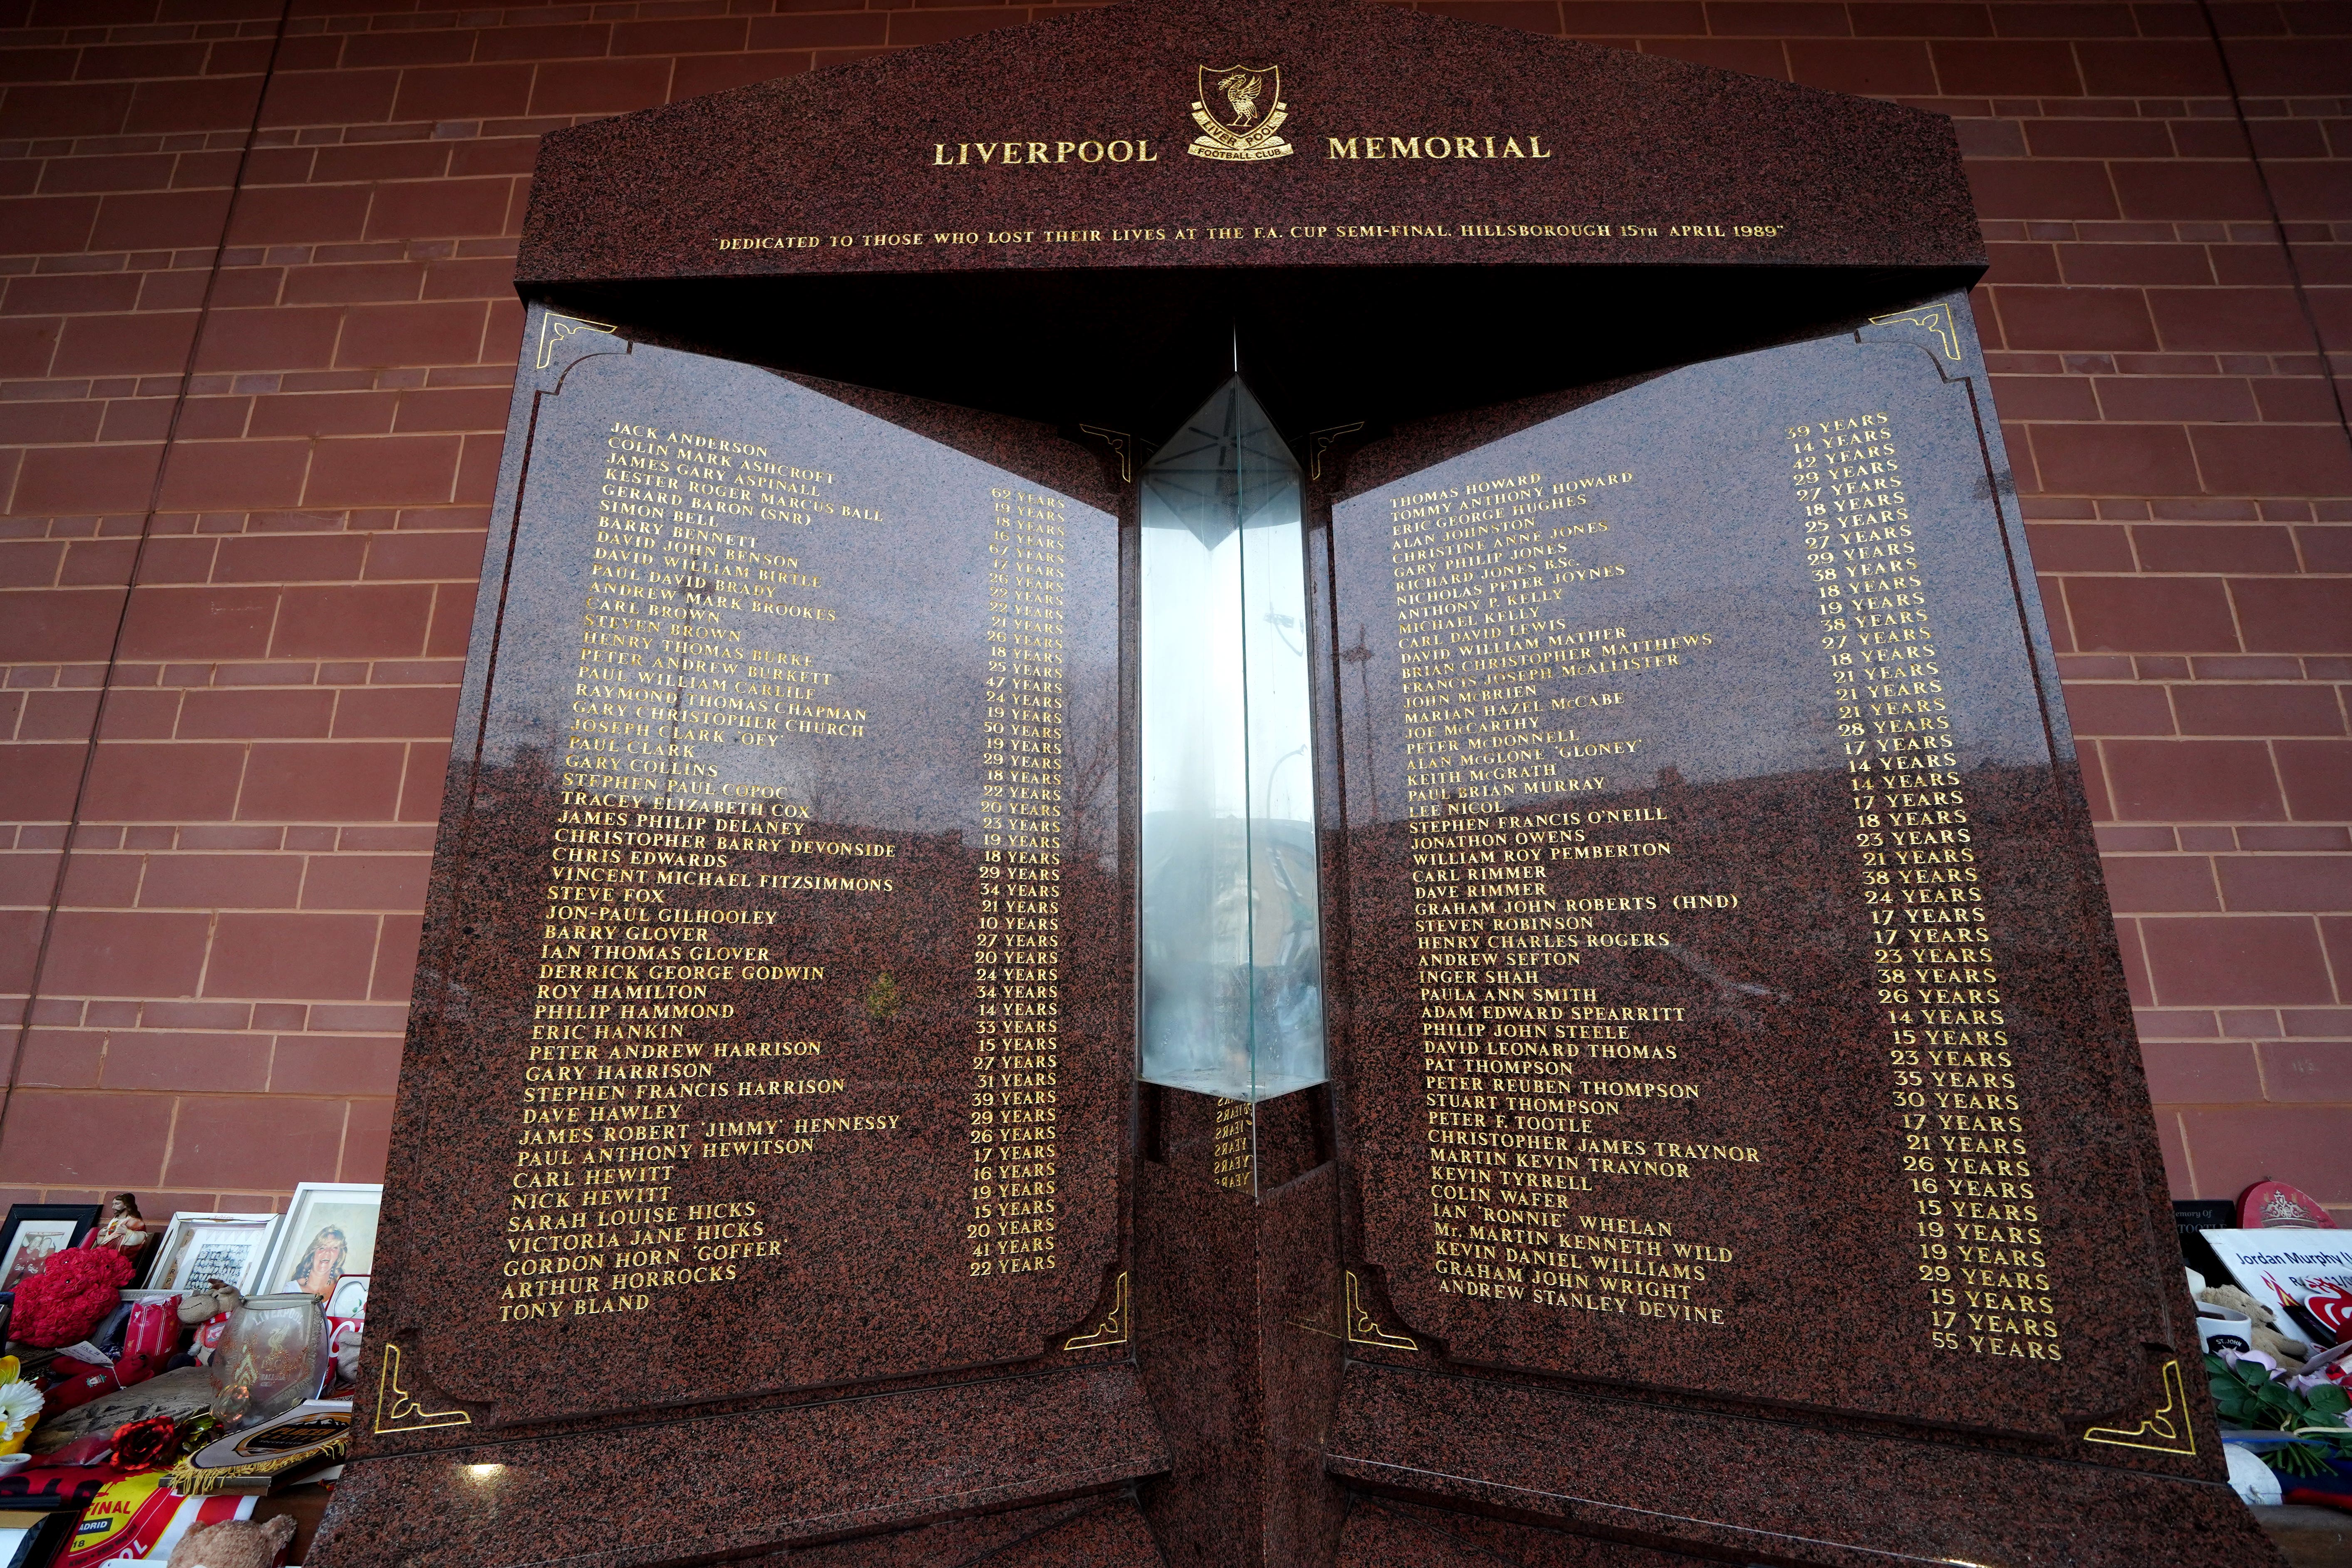 Ninety-seven Liverpool fans died in the Hillsborough disaster